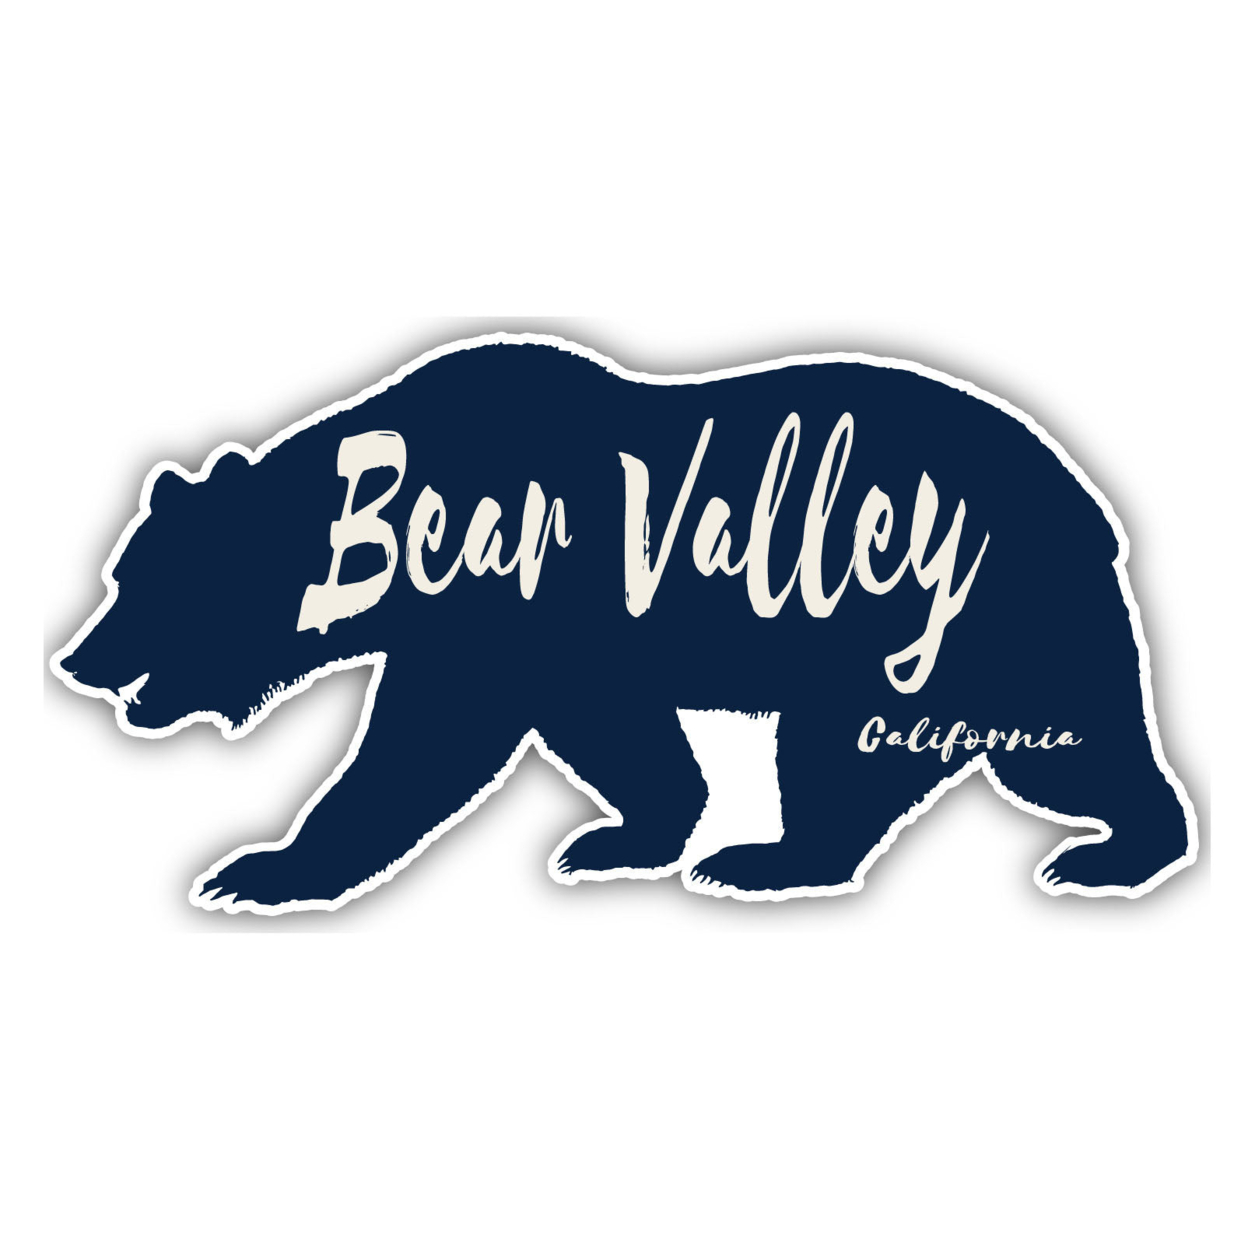 Bear Valley California Souvenir Decorative Stickers (Choose Theme And Size) - 4-Pack, 6-Inch, Great Outdoors